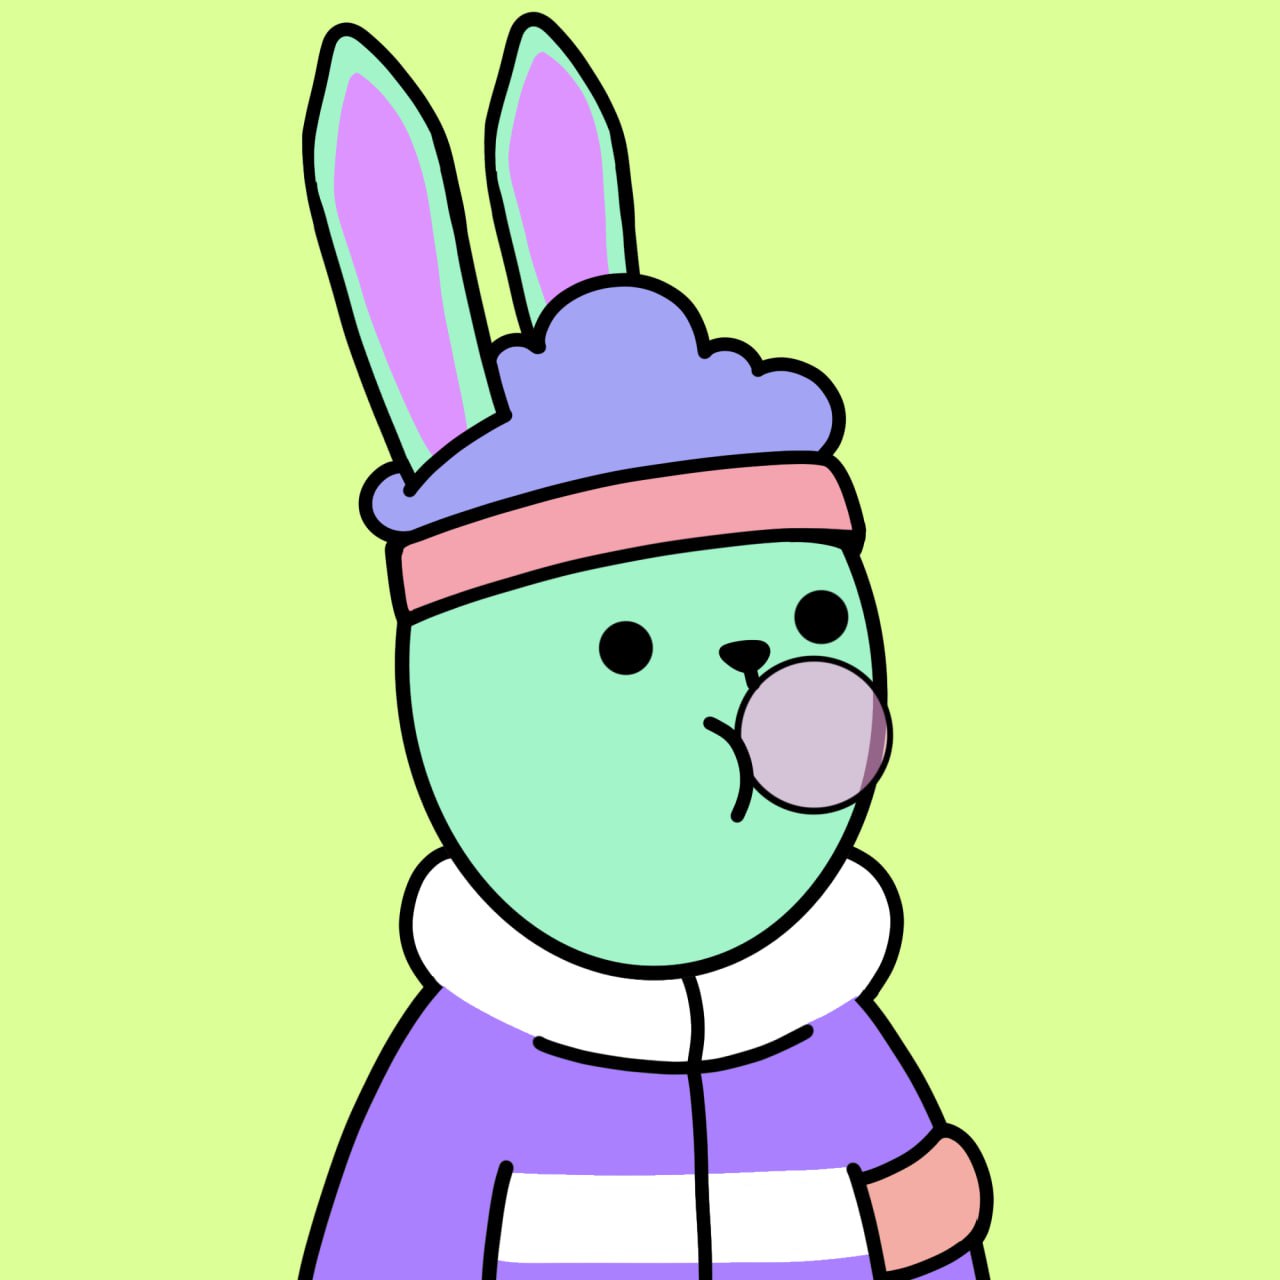 Doodle Bunny on Flare Network